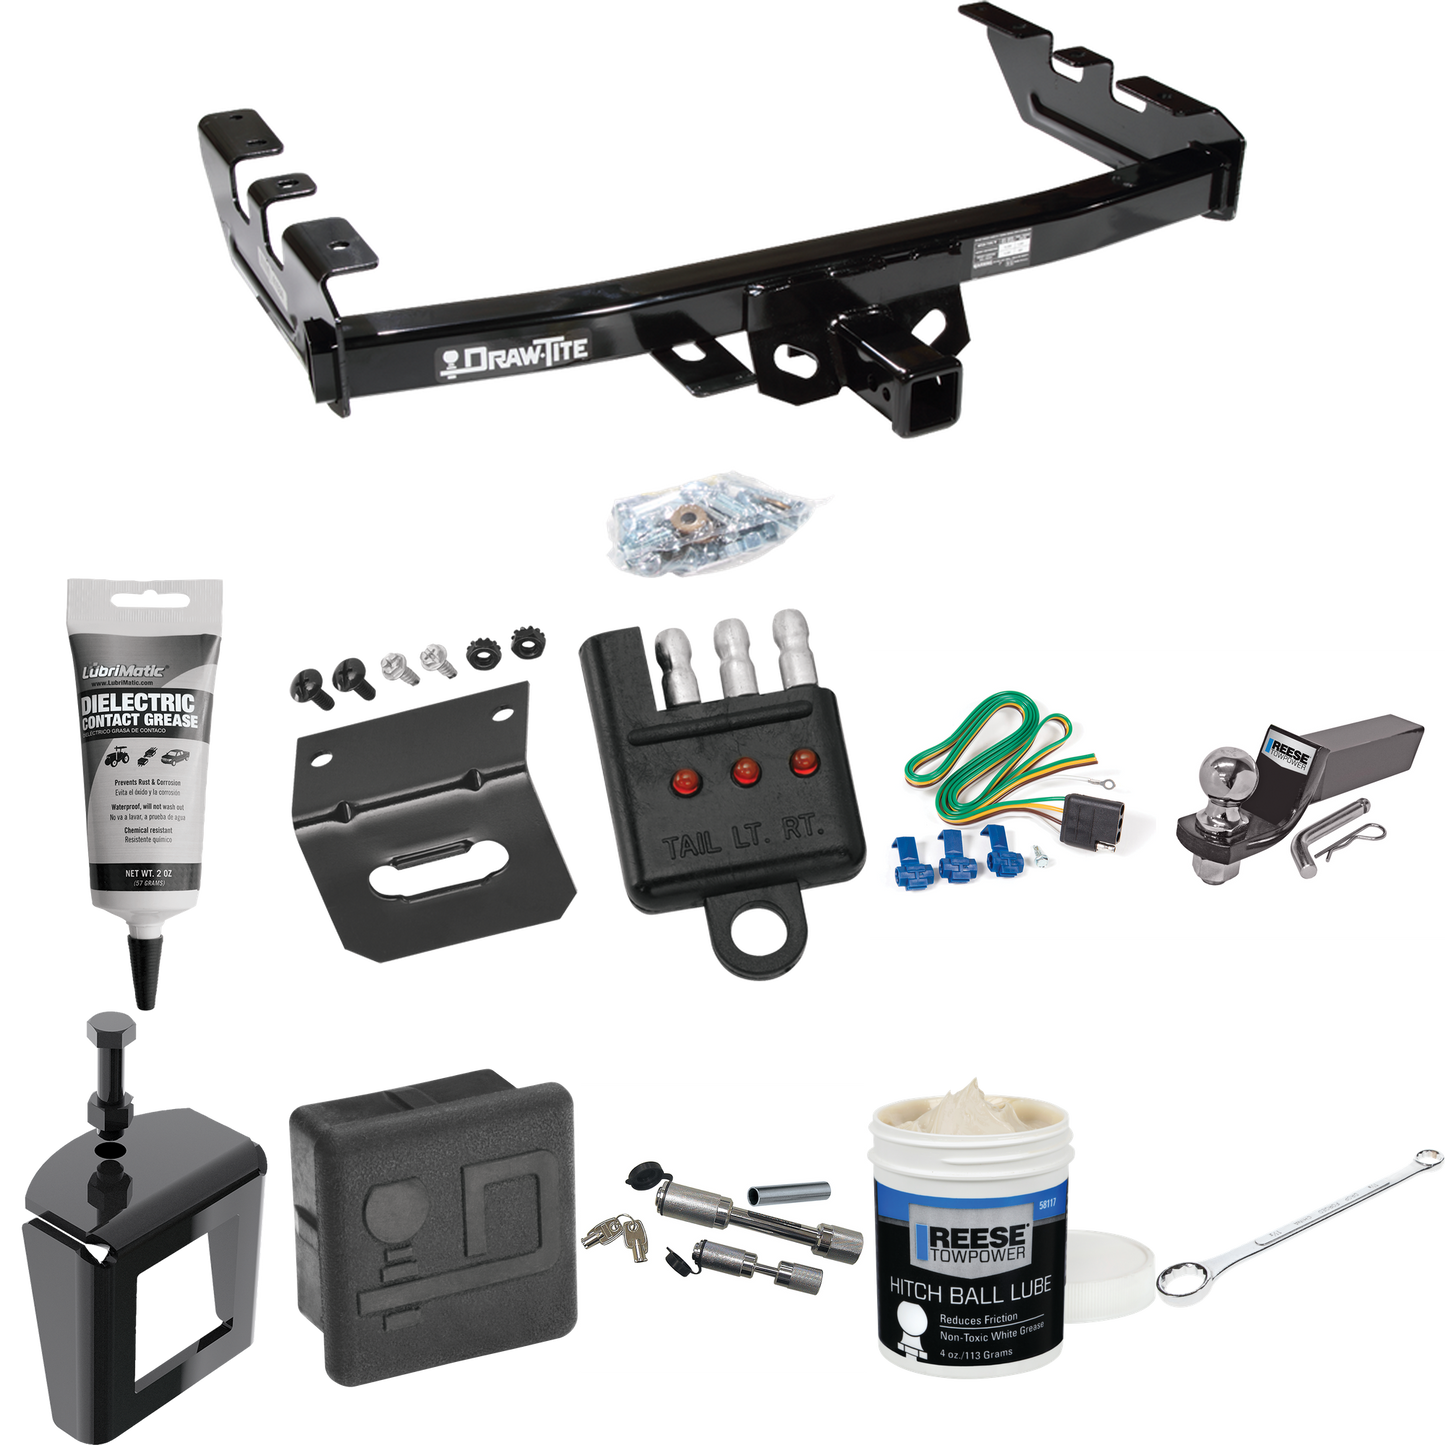 Fits 2001-2003 GMC Sierra 1500 HD Trailer Hitch Tow PKG w/ 4-Flat Wiring + Starter Kit Ball Mount w/ 2" Drop & 2" Ball + Wiring Bracket + Hitch Cover + Dual Hitch & Coupler Locks + Wiring Tester + Ball Lube + Electric Grease + Ball Wrench + Anti Ratt